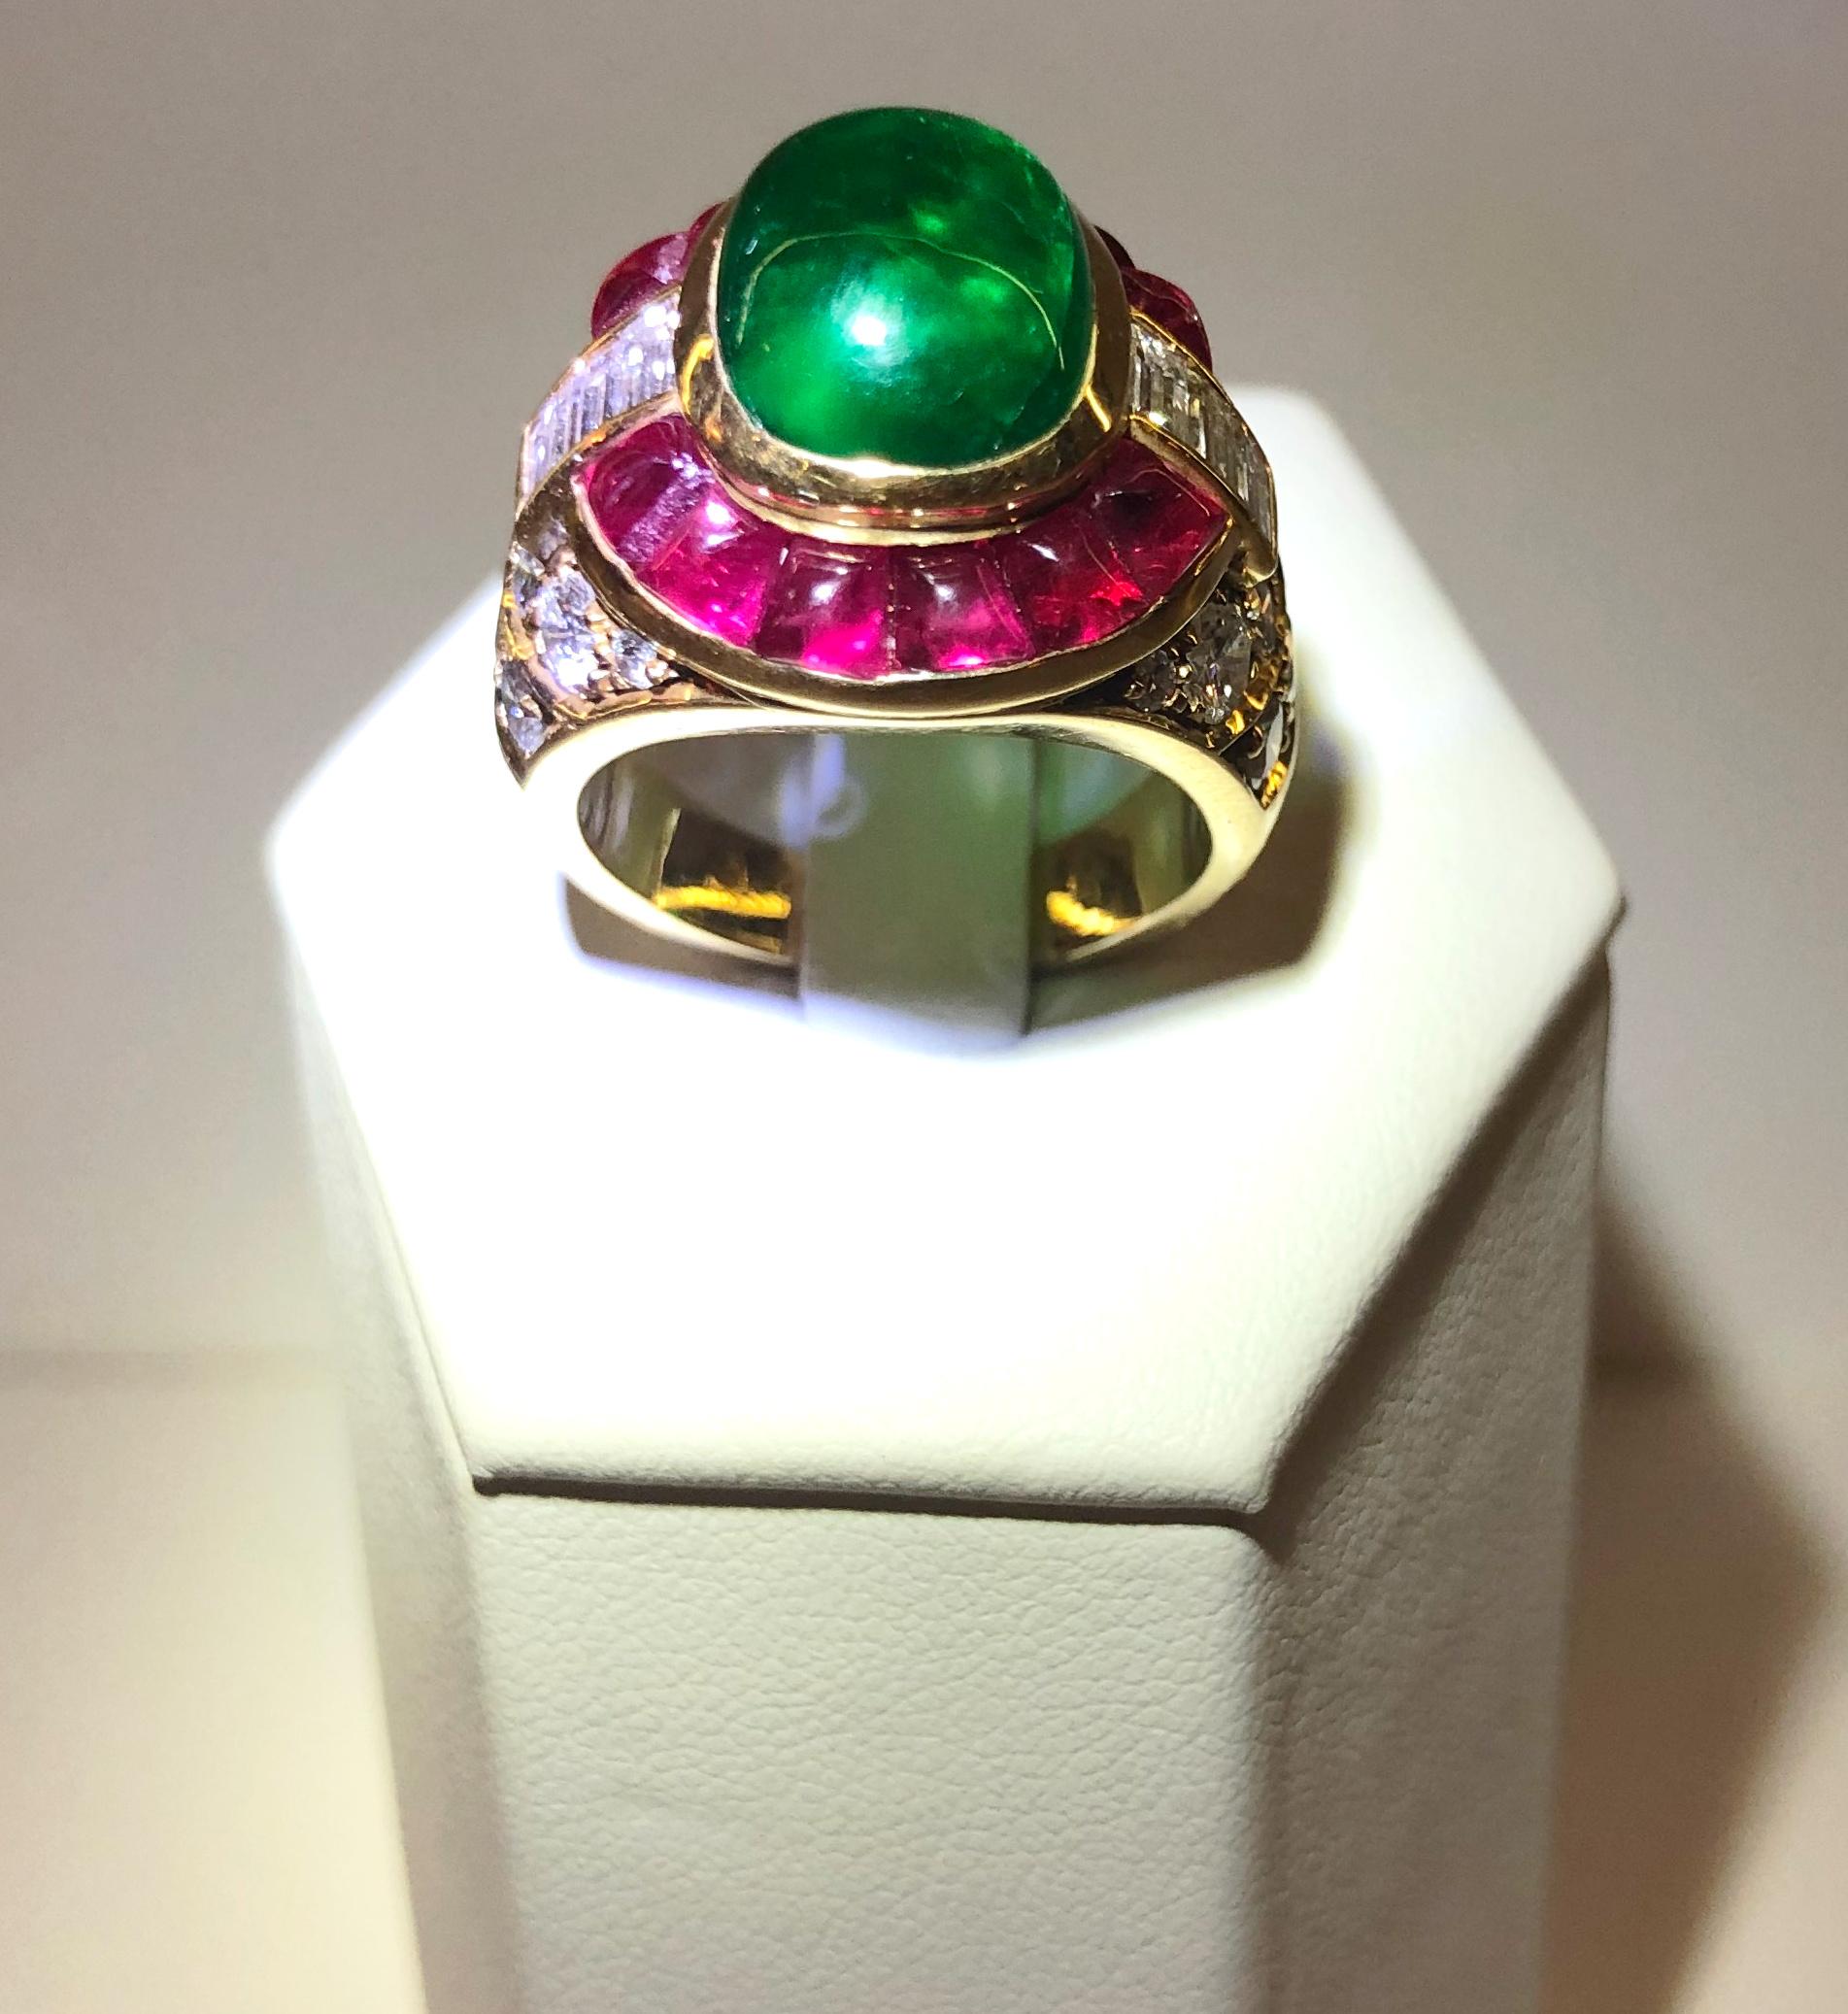 Vintage 18 karat yellow gold ring, with 3.7 karats of emerald and rubies in Cabochon cut, and 2 karats of diamonds in Baguette cut, Italy 1960s
Ring size US 6